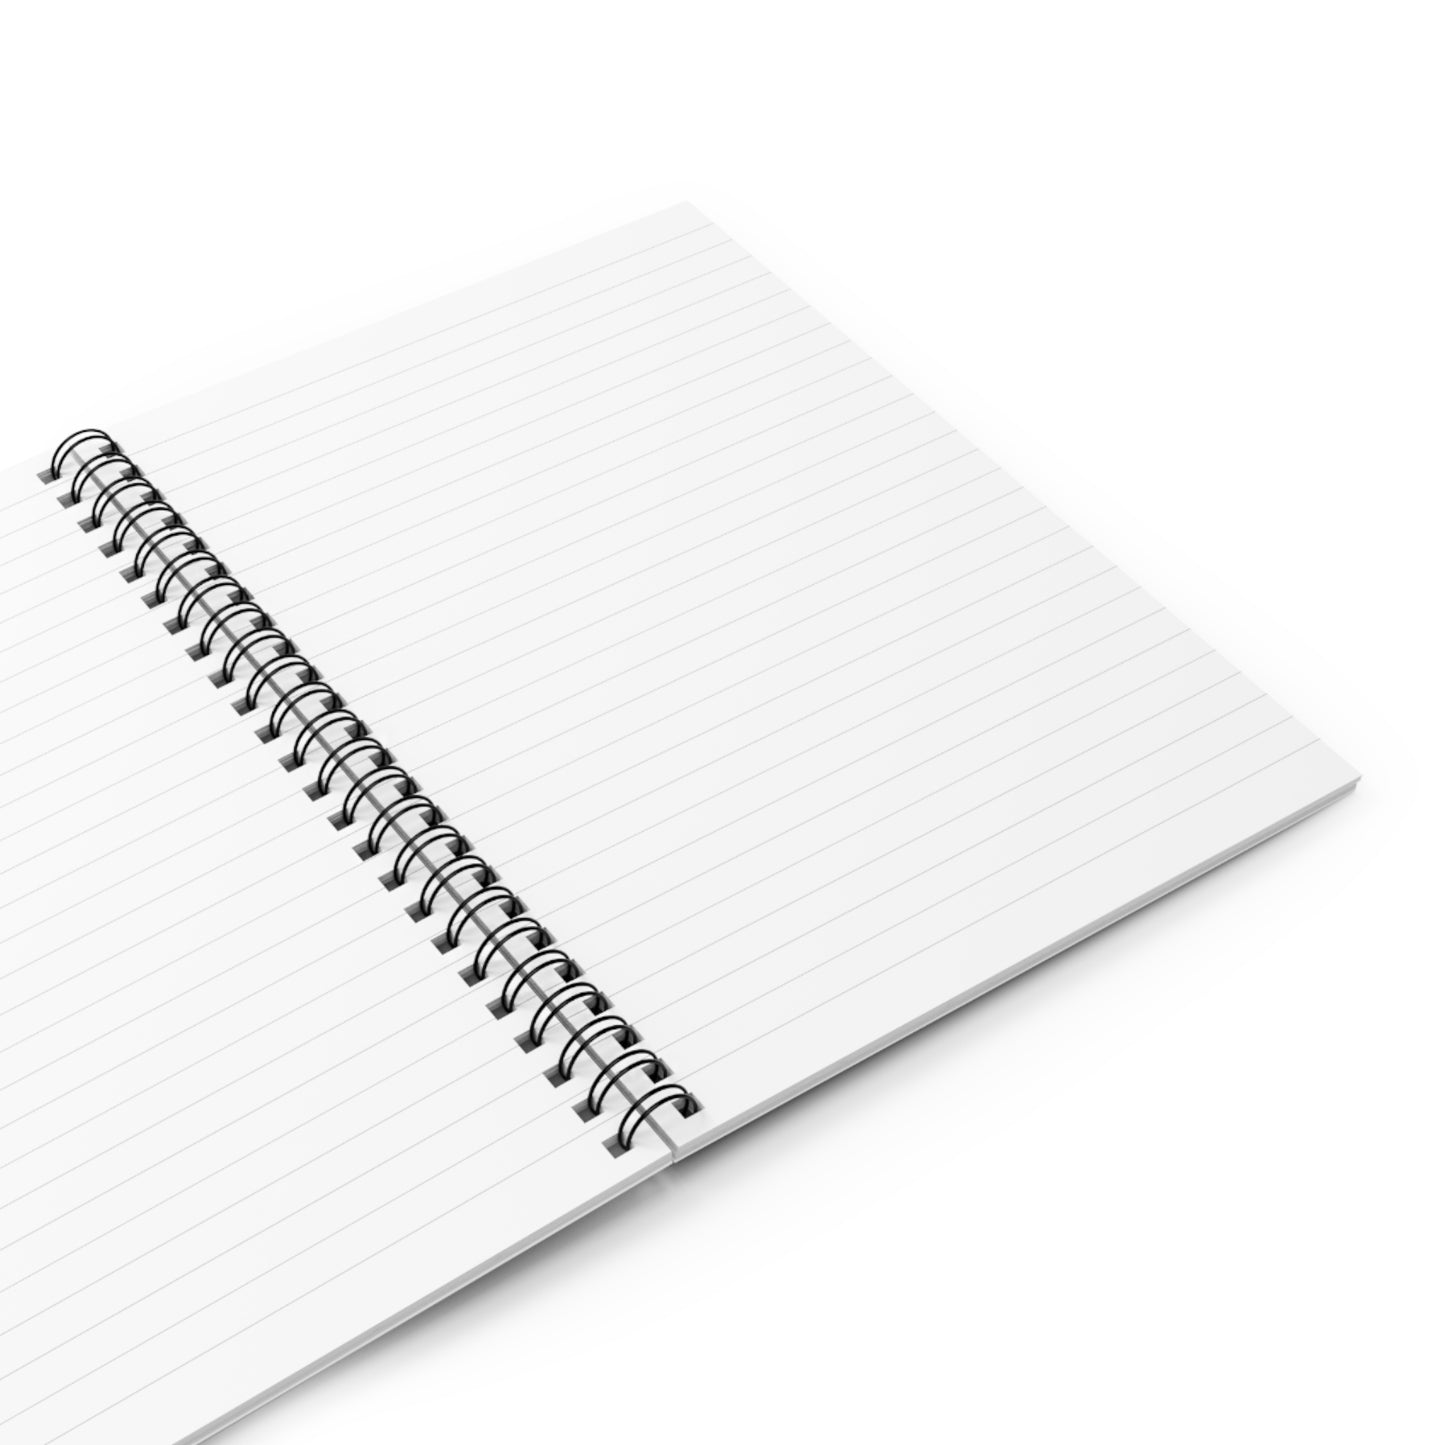 Louvre Spiral Notebook - Ruled Line